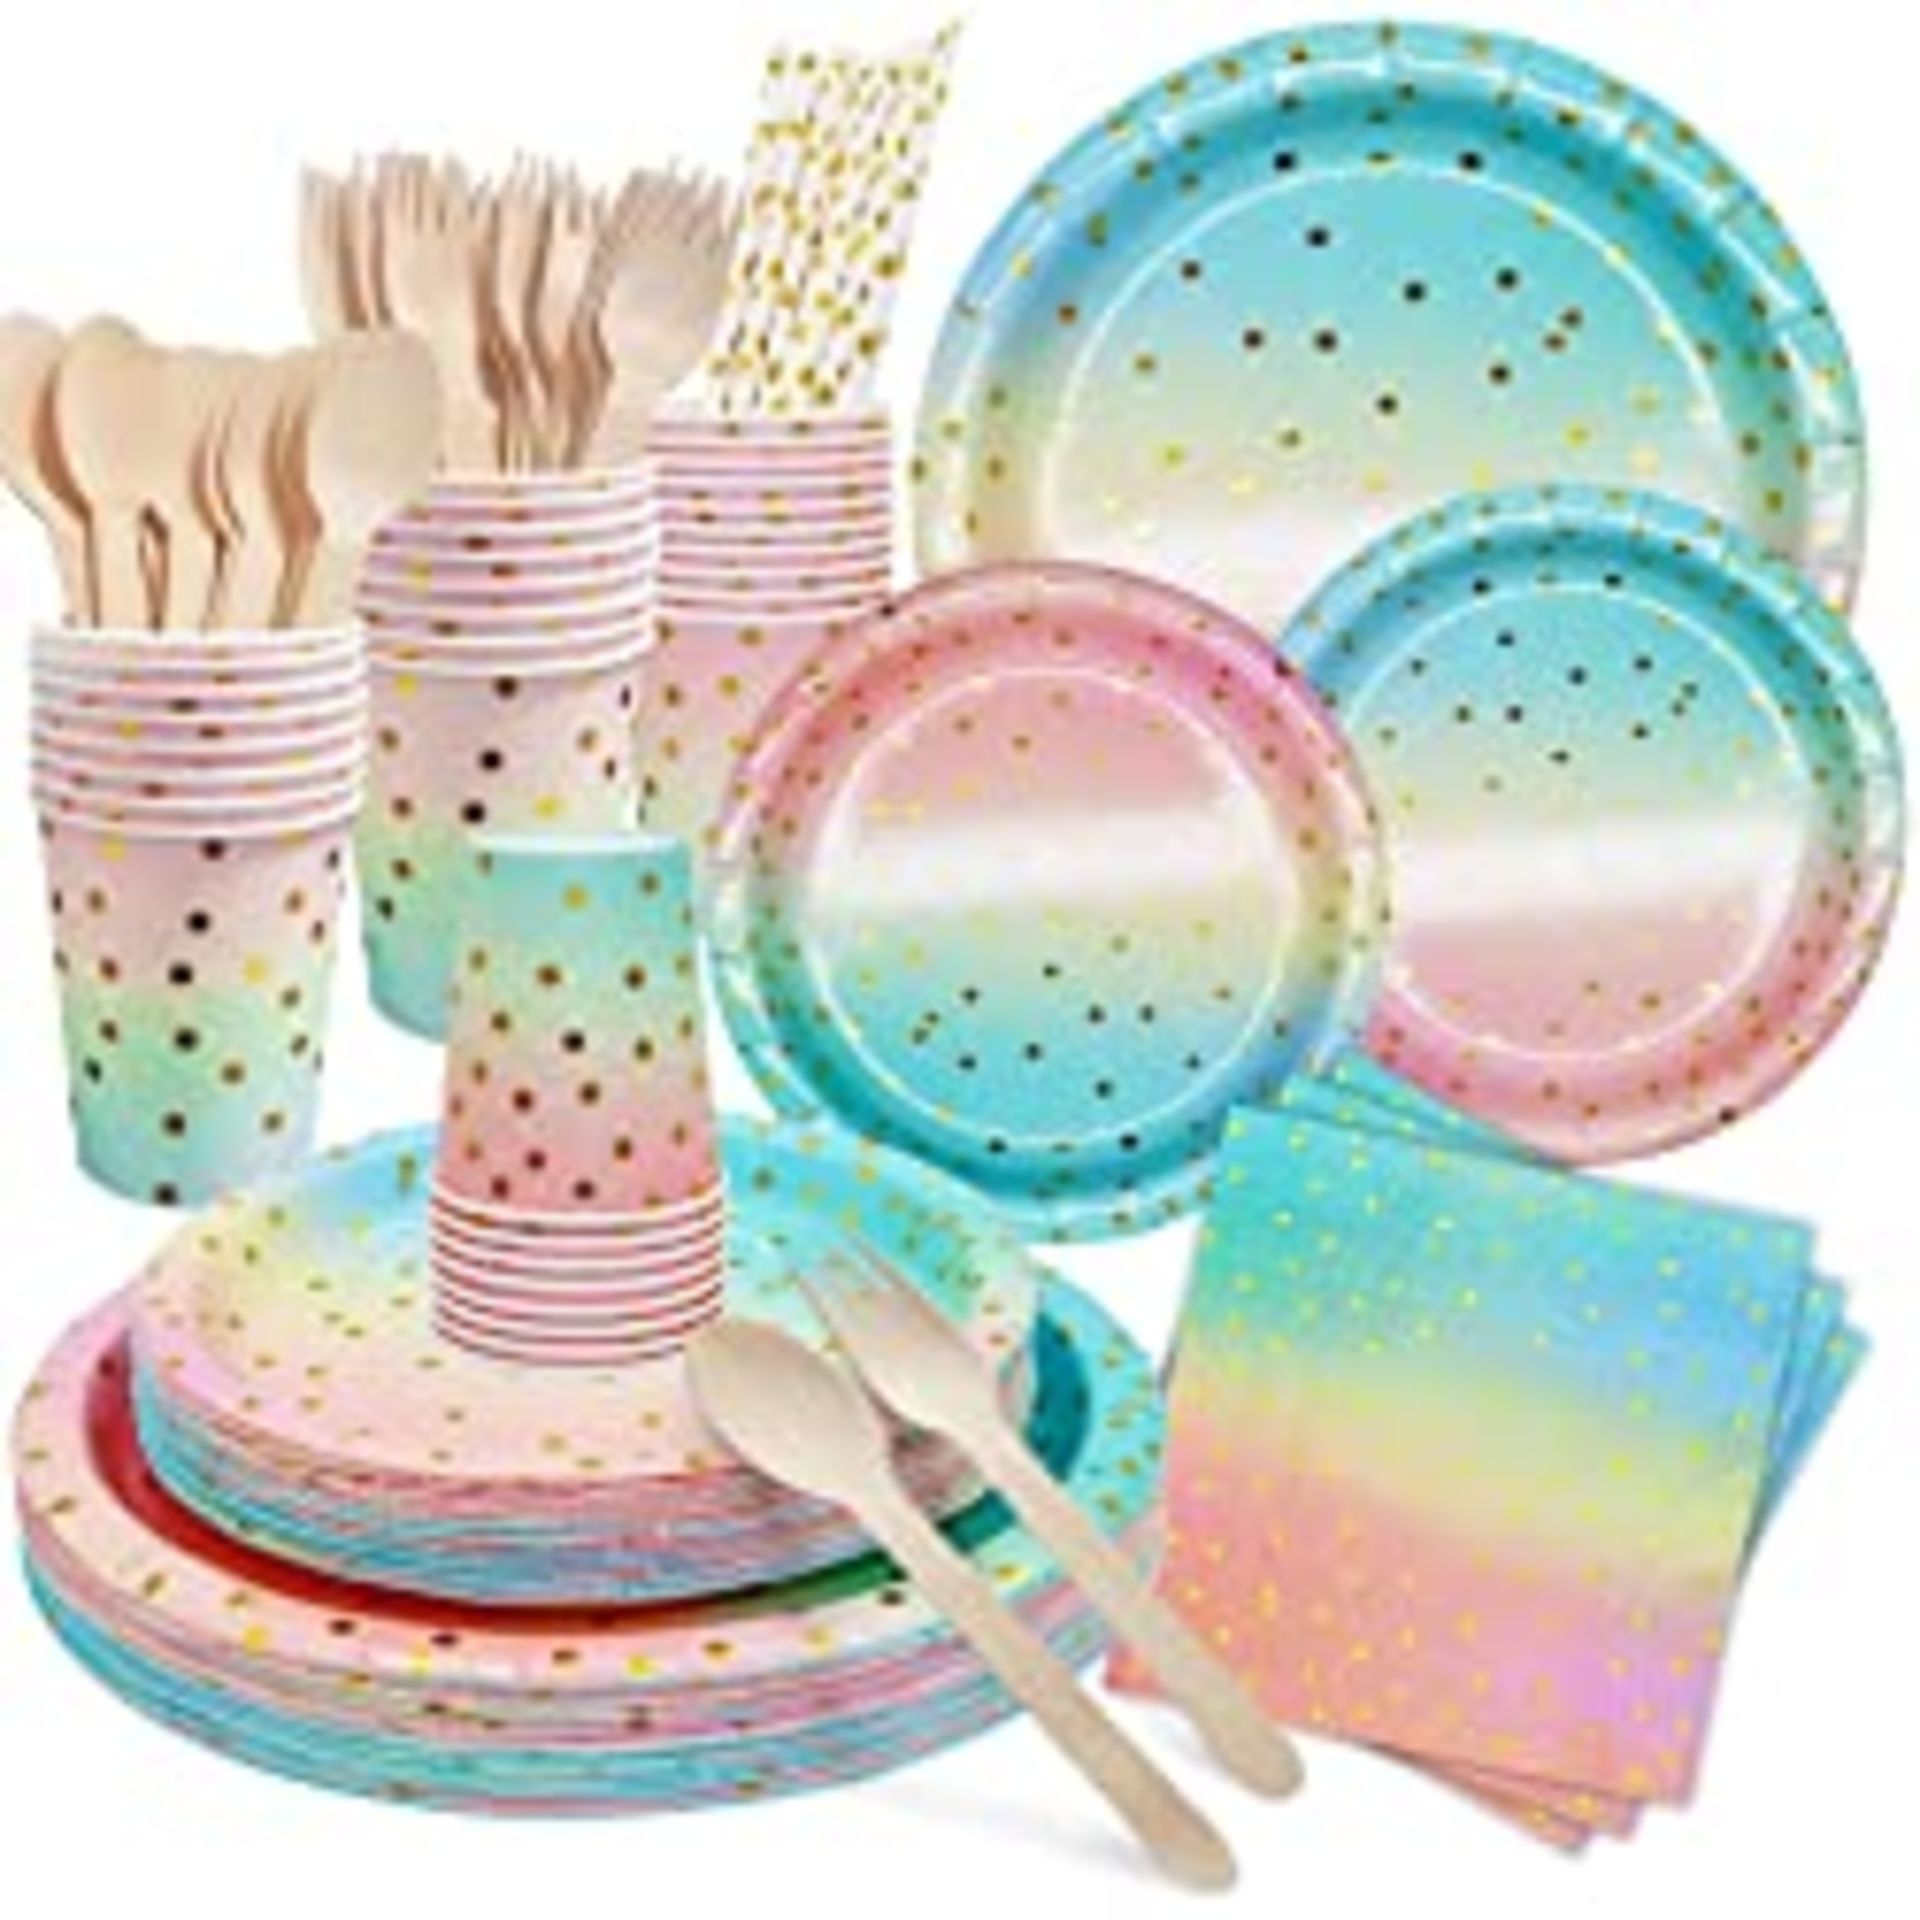 RRP £237.58 Total, Lot Consisting of 14 Items - See Description. - Image 13 of 14